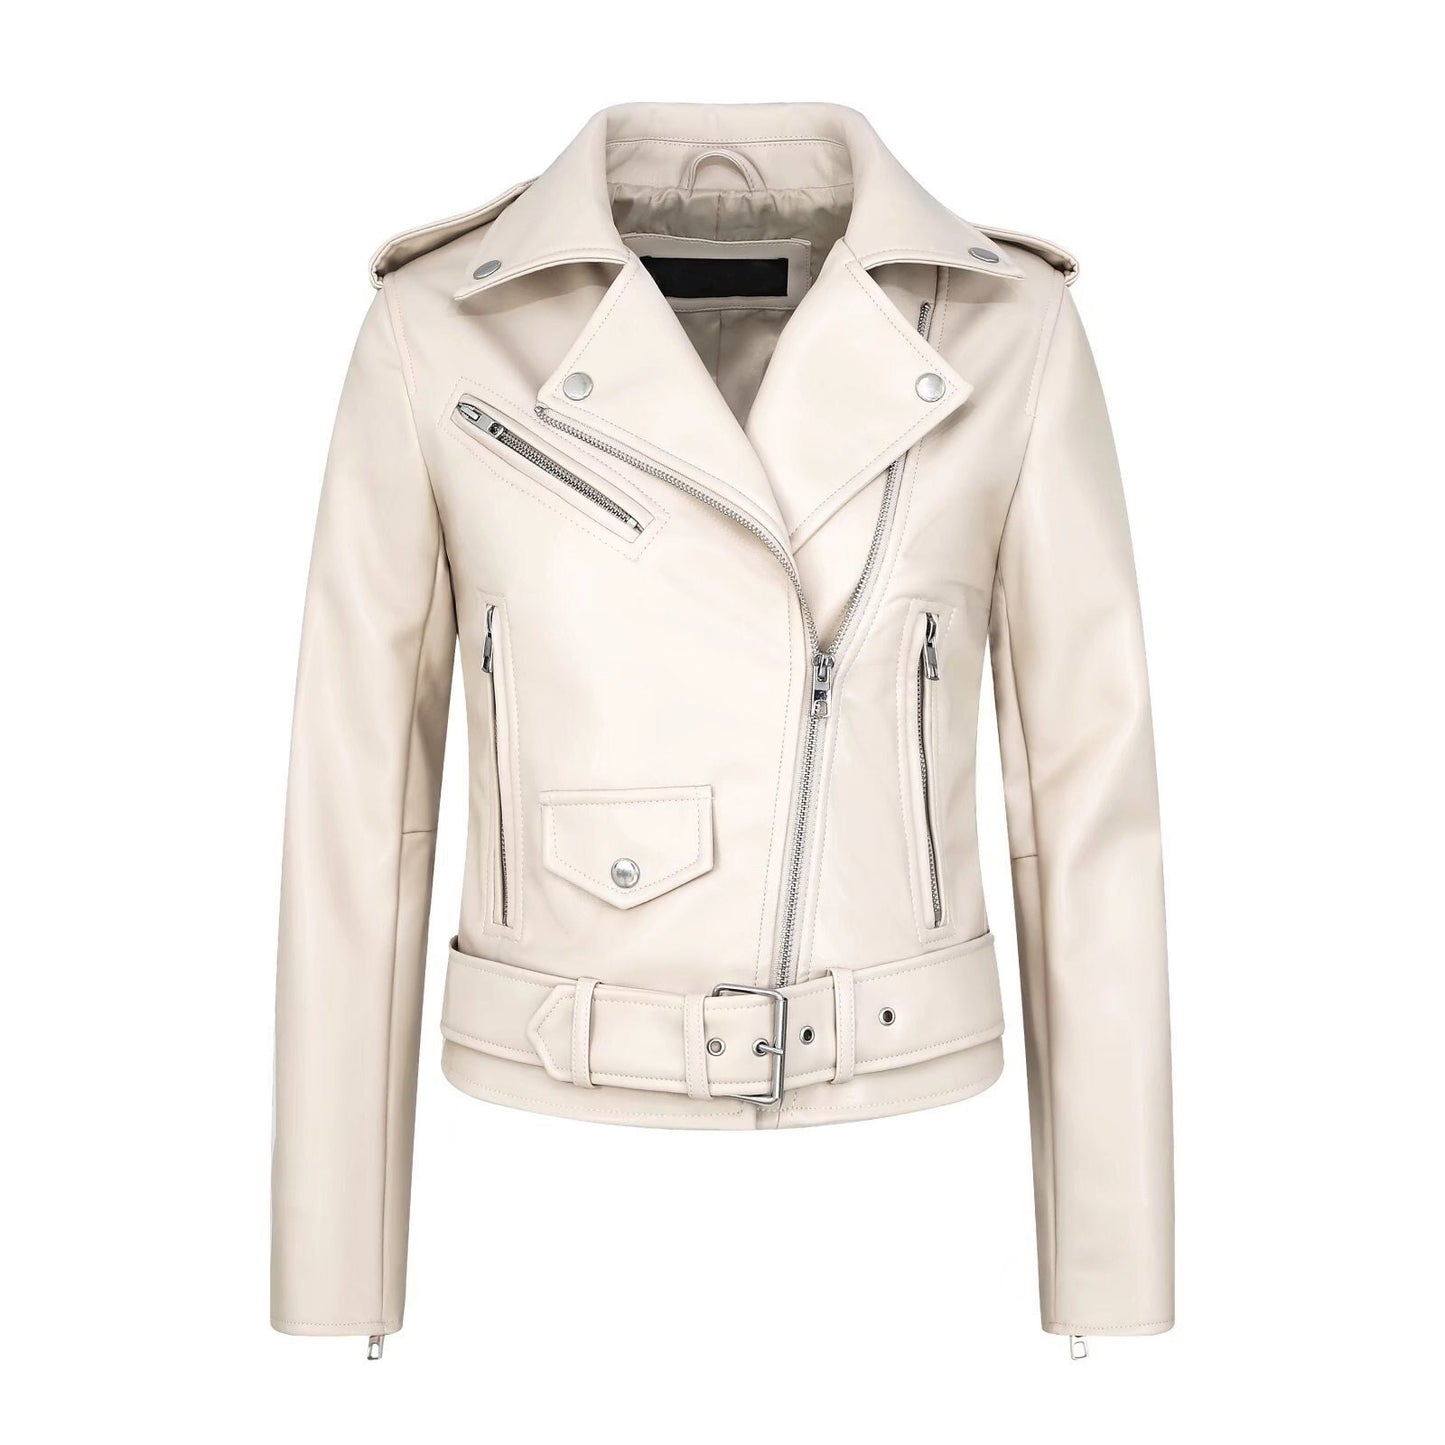 Off White Leather Jacket For Women's